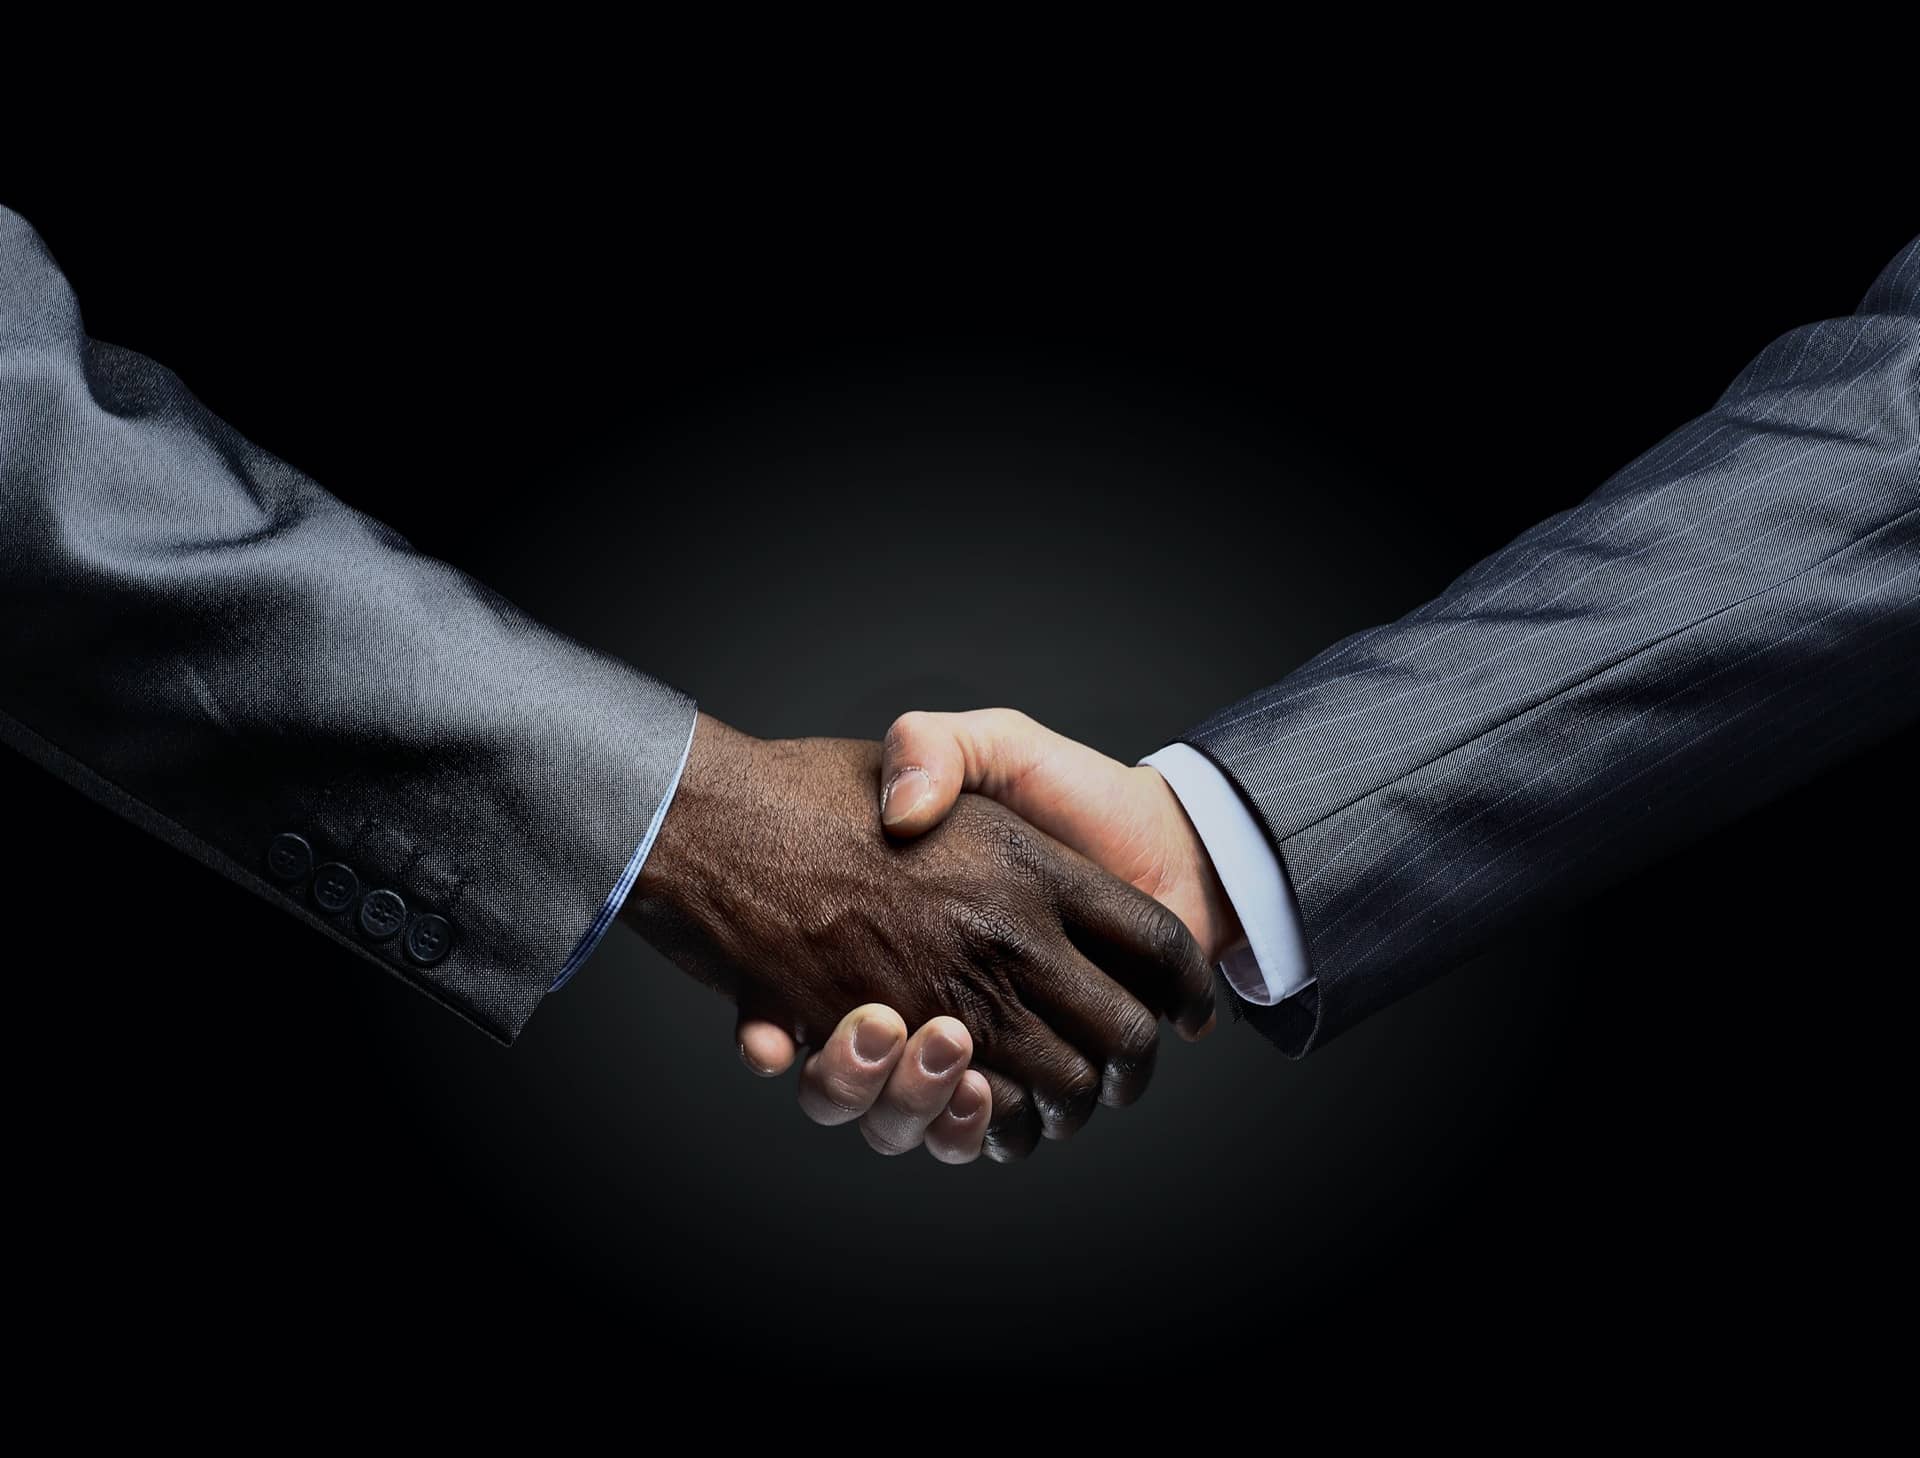 Handshake on a deal for purchasing technology